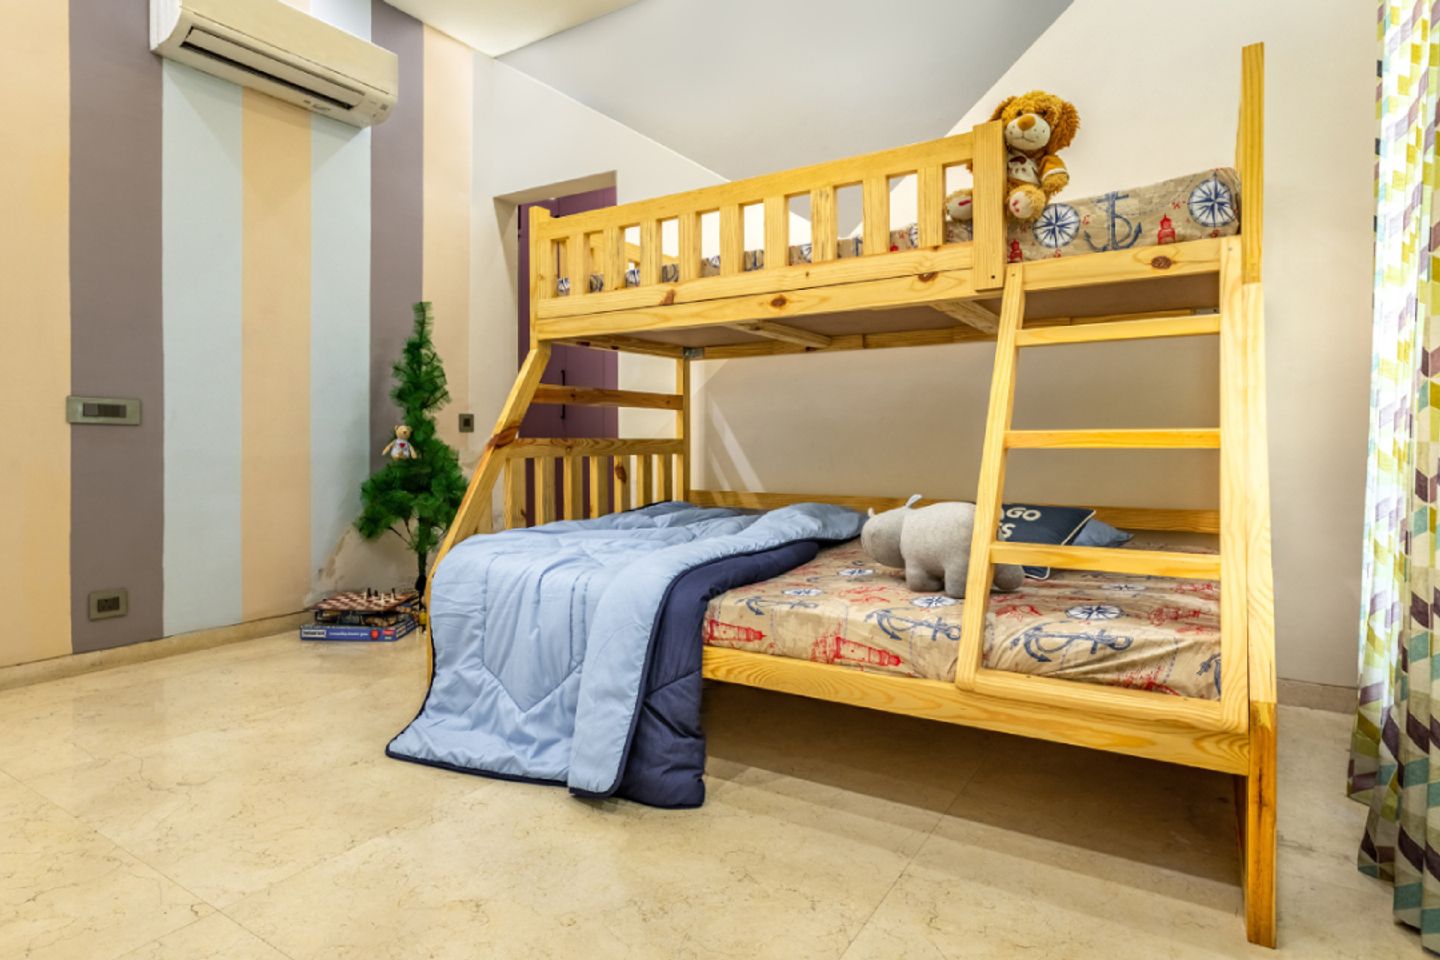 Contemporary Boys Room Design With Wooden Bunk Bed